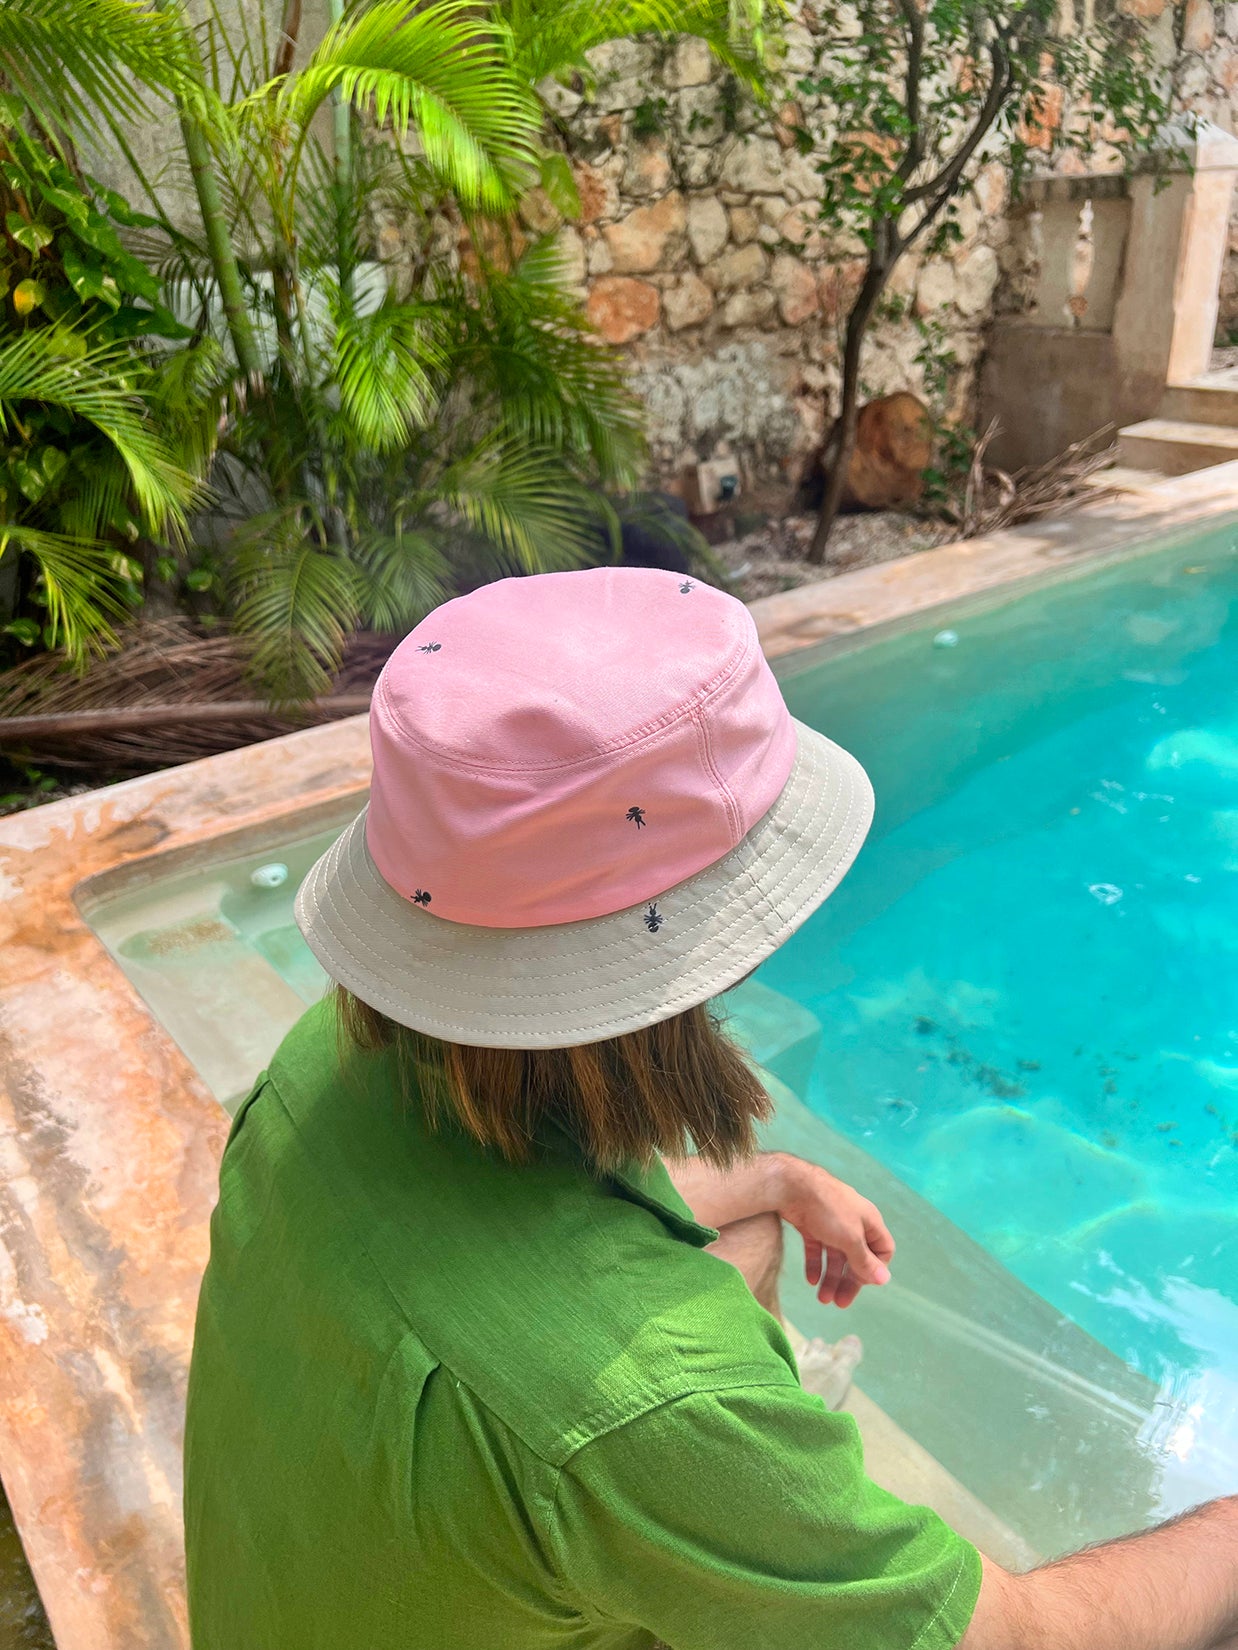 Natali Koromoto x HO HOS HOLE IN THE WALL brands "Ants on Your Hat"  print design bucket hat in Pink Lemonade and Pearl Grey dye colorway fabric combo